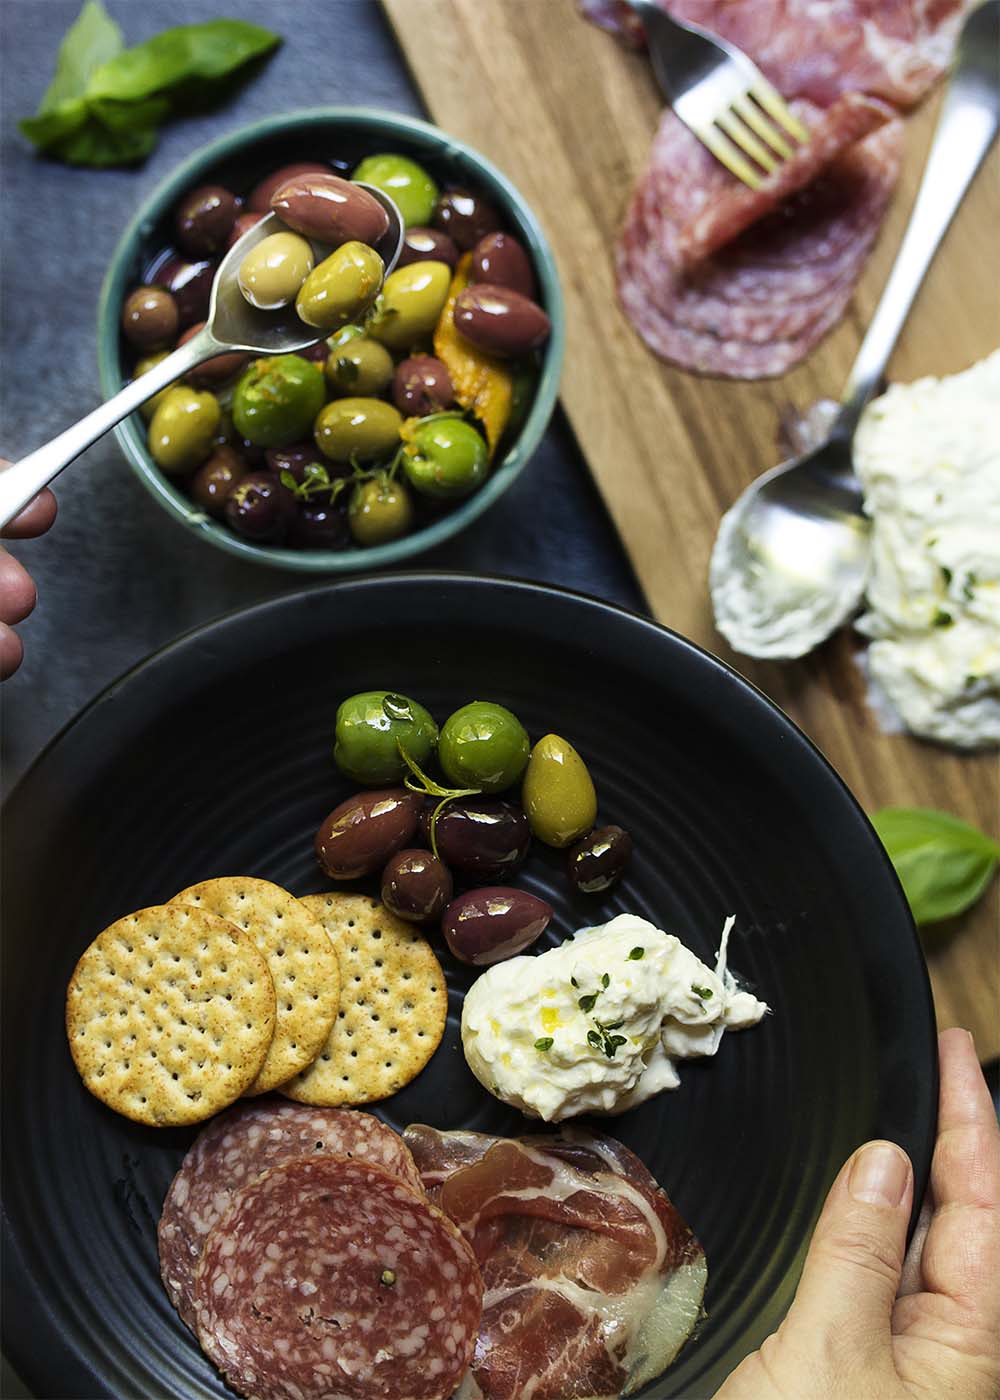 Italian marinated olives are an easy party appetizer of mixed olives, citrus, and herbs which takes only a few minutes to put together. | justalittlebitofbacon.com